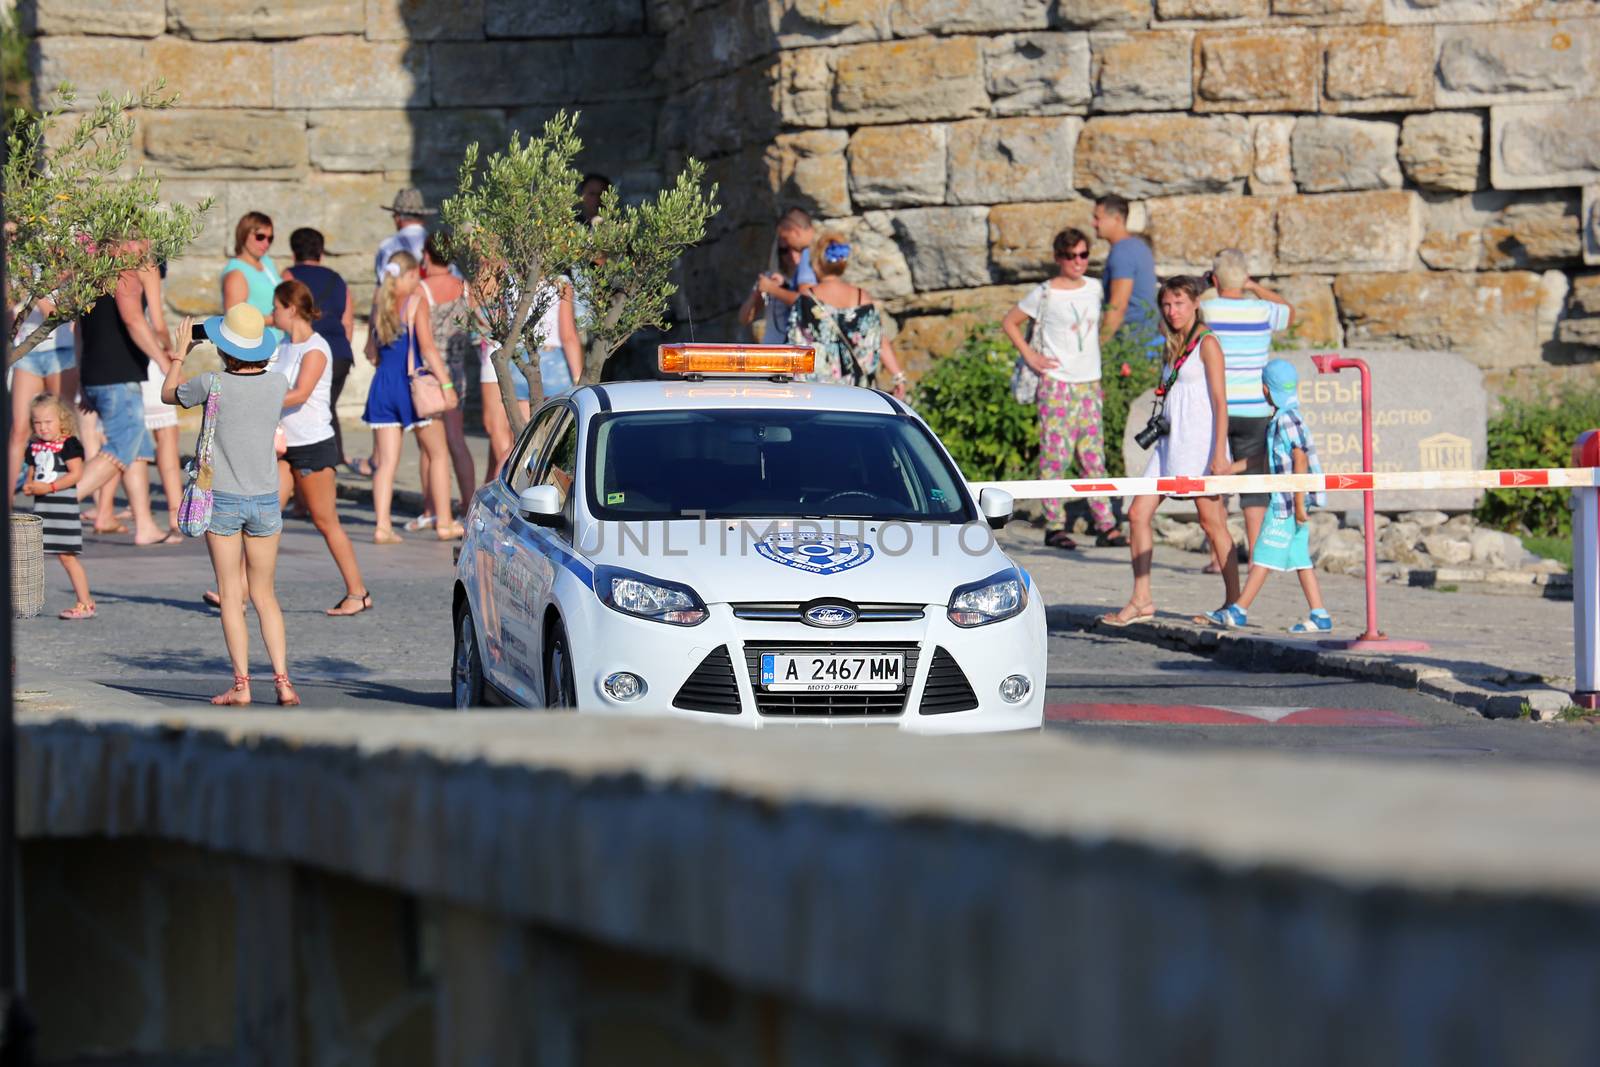 Nessebar, Bulgaria - July 16, 2016: White Ford Focus Police (Municipality Of Nessebar) Car Parked on the Street in Nessebar on the Bulgarian Black Sea Coast, Nobody in Vehicle